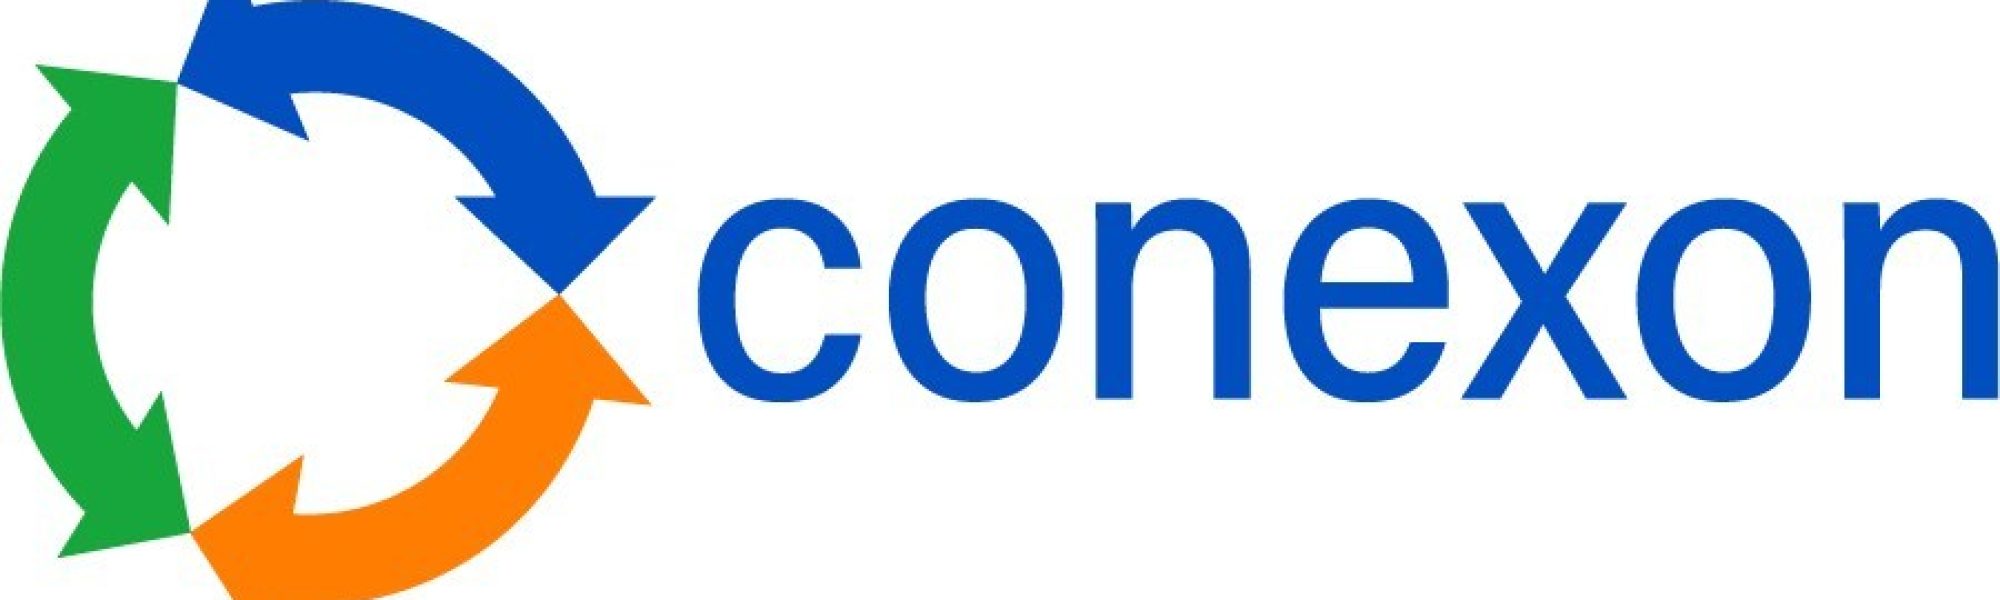 New Hampshire Electric Cooperative and Conexon expand partnership to deliver fiber-to-the-home internet service to thousands of NH homes and businesses